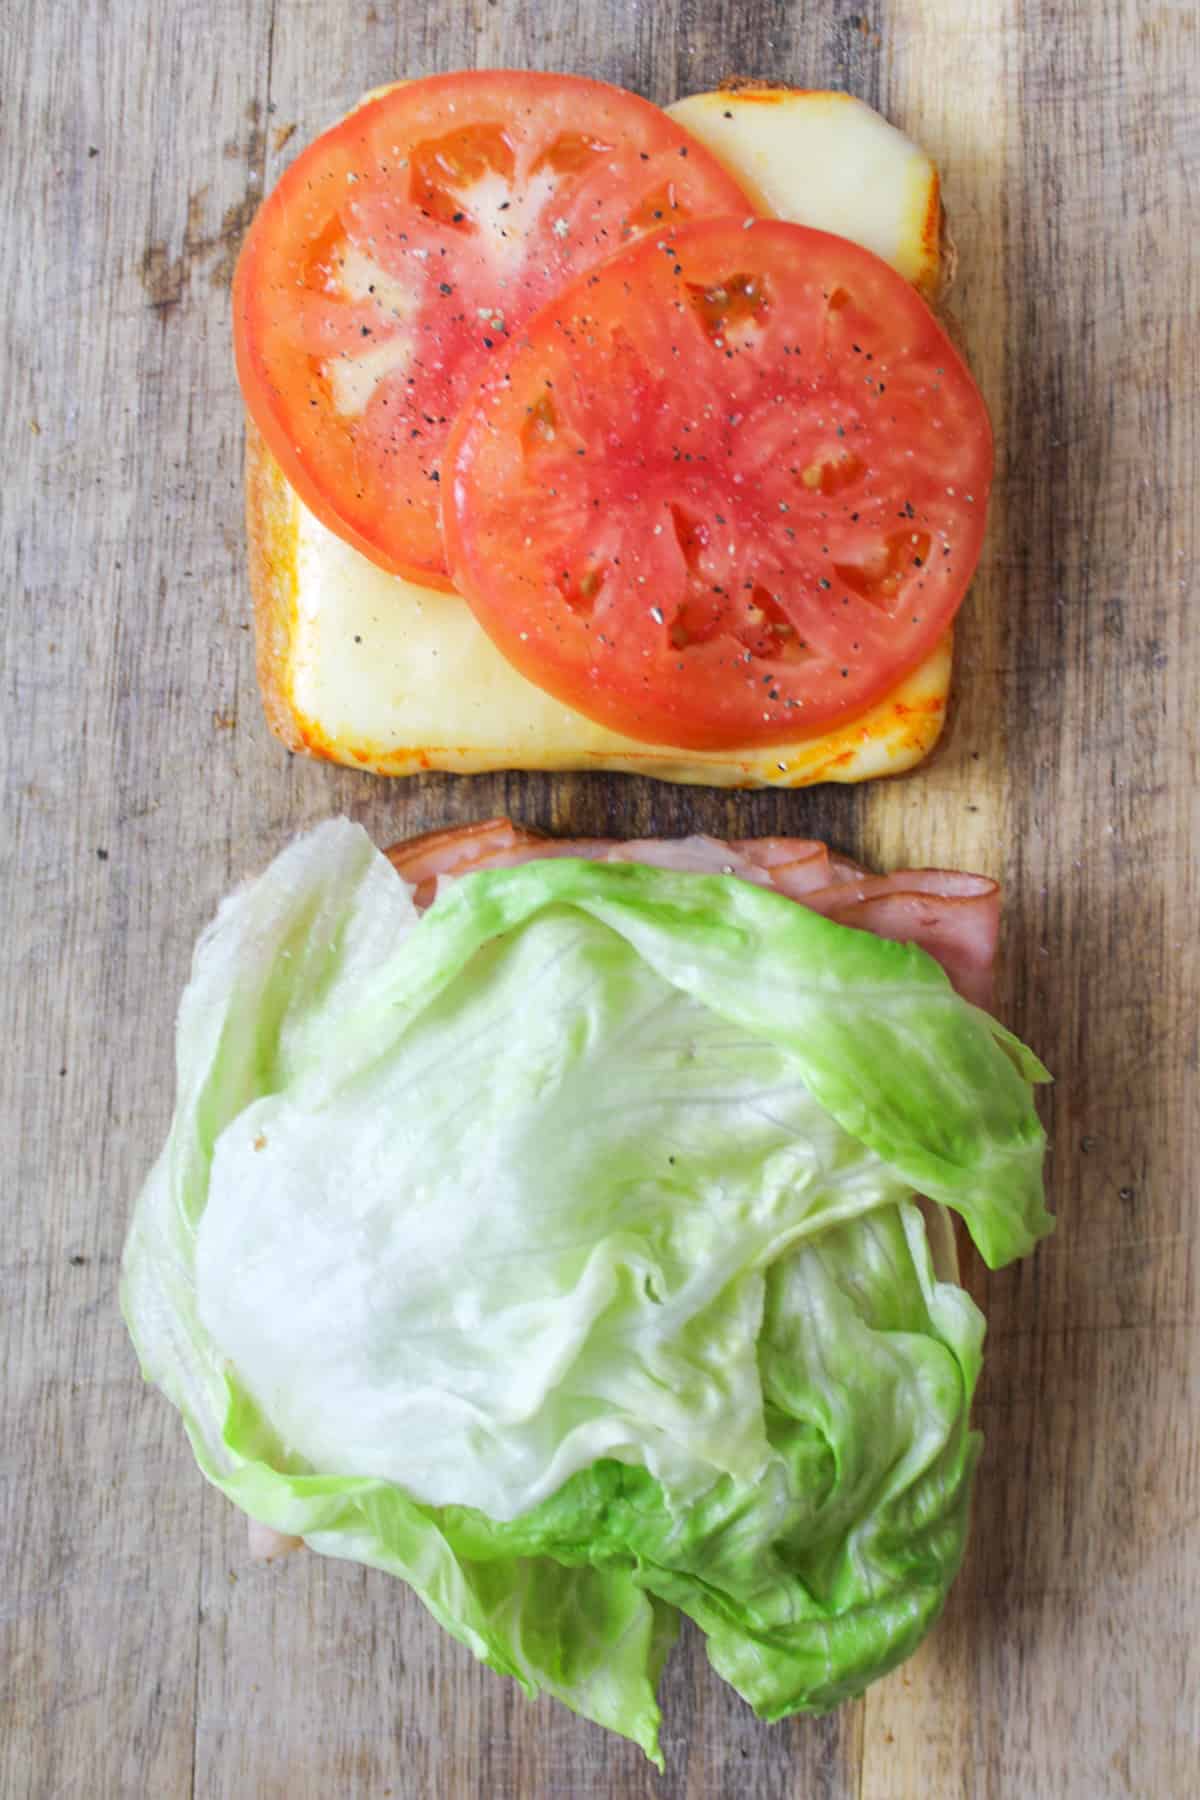 open faced club sandwich showing salt and pepper on tomatoes and cheese with meat and lettuce on another slice of bread